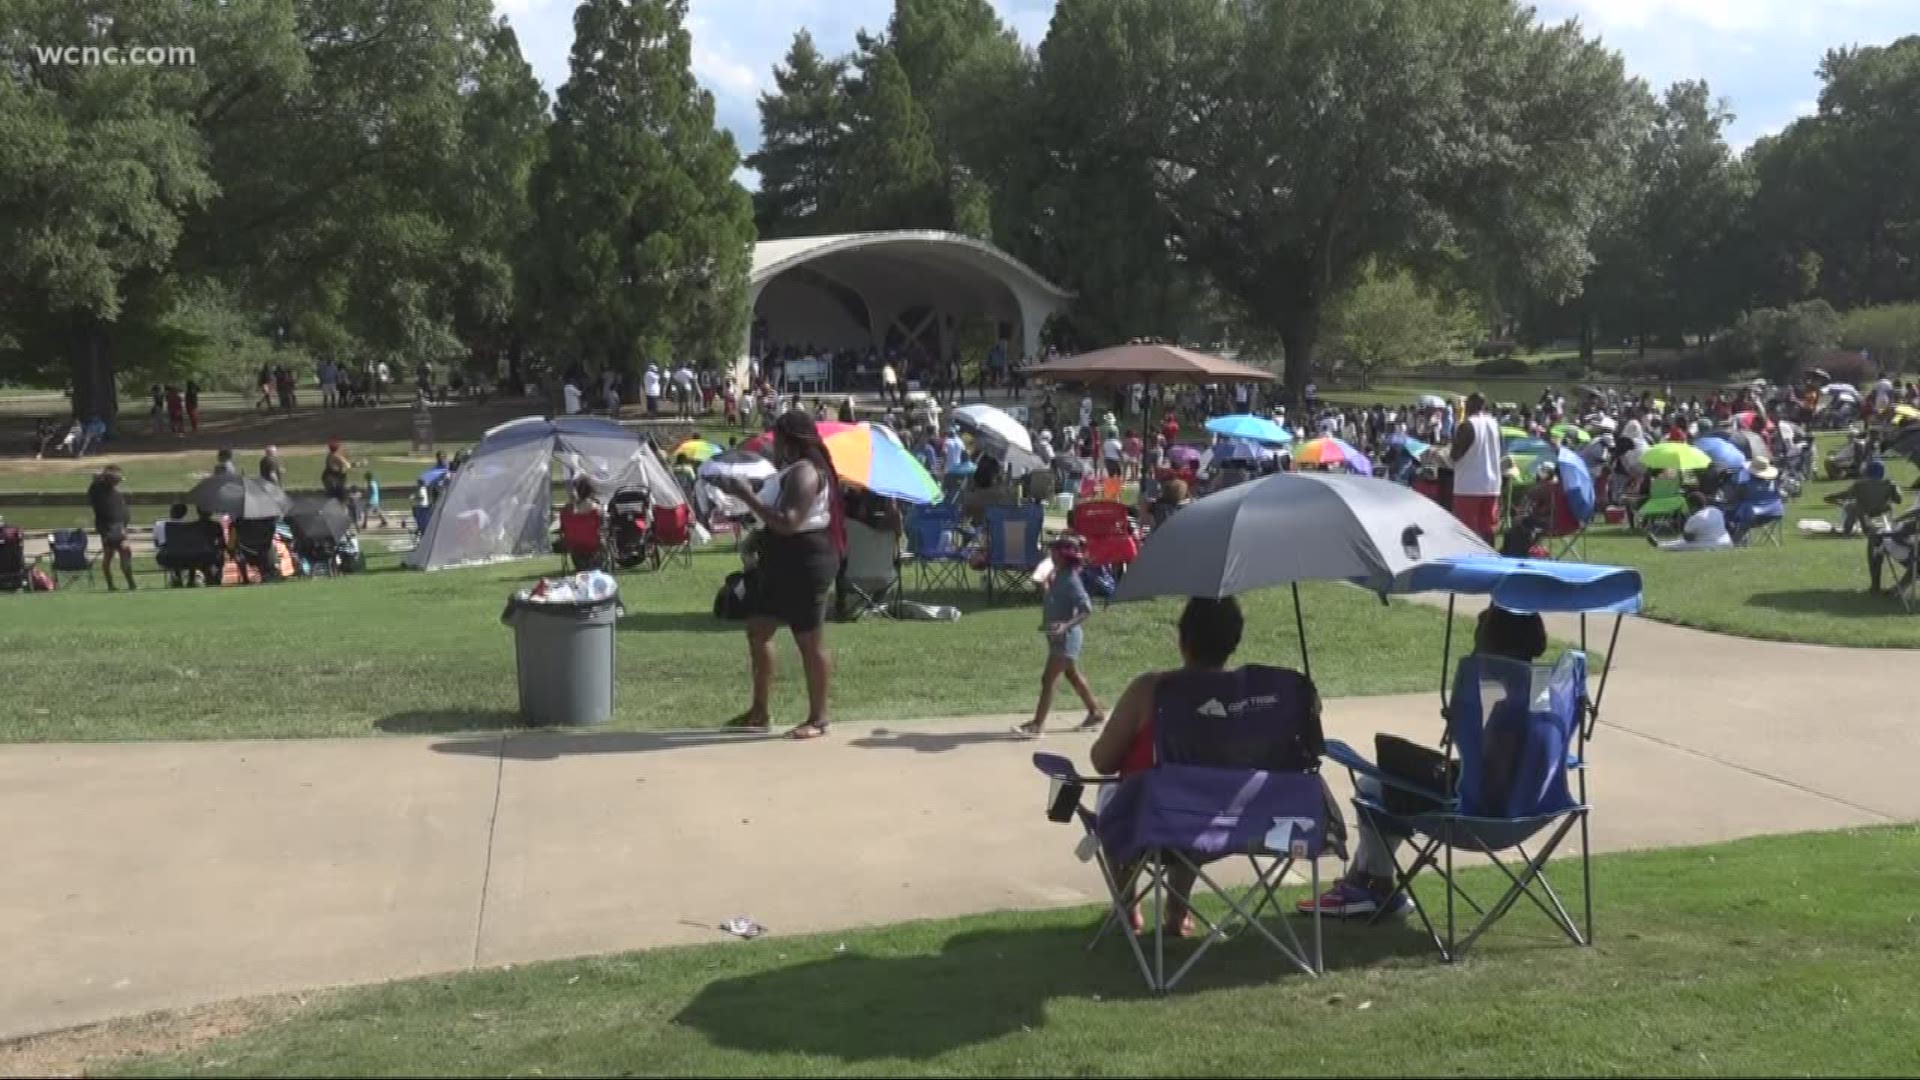 An event called "Charlotte Day", organized by the United Neighborhoods of Charlotte, was being held at the park to celebrate community unity.